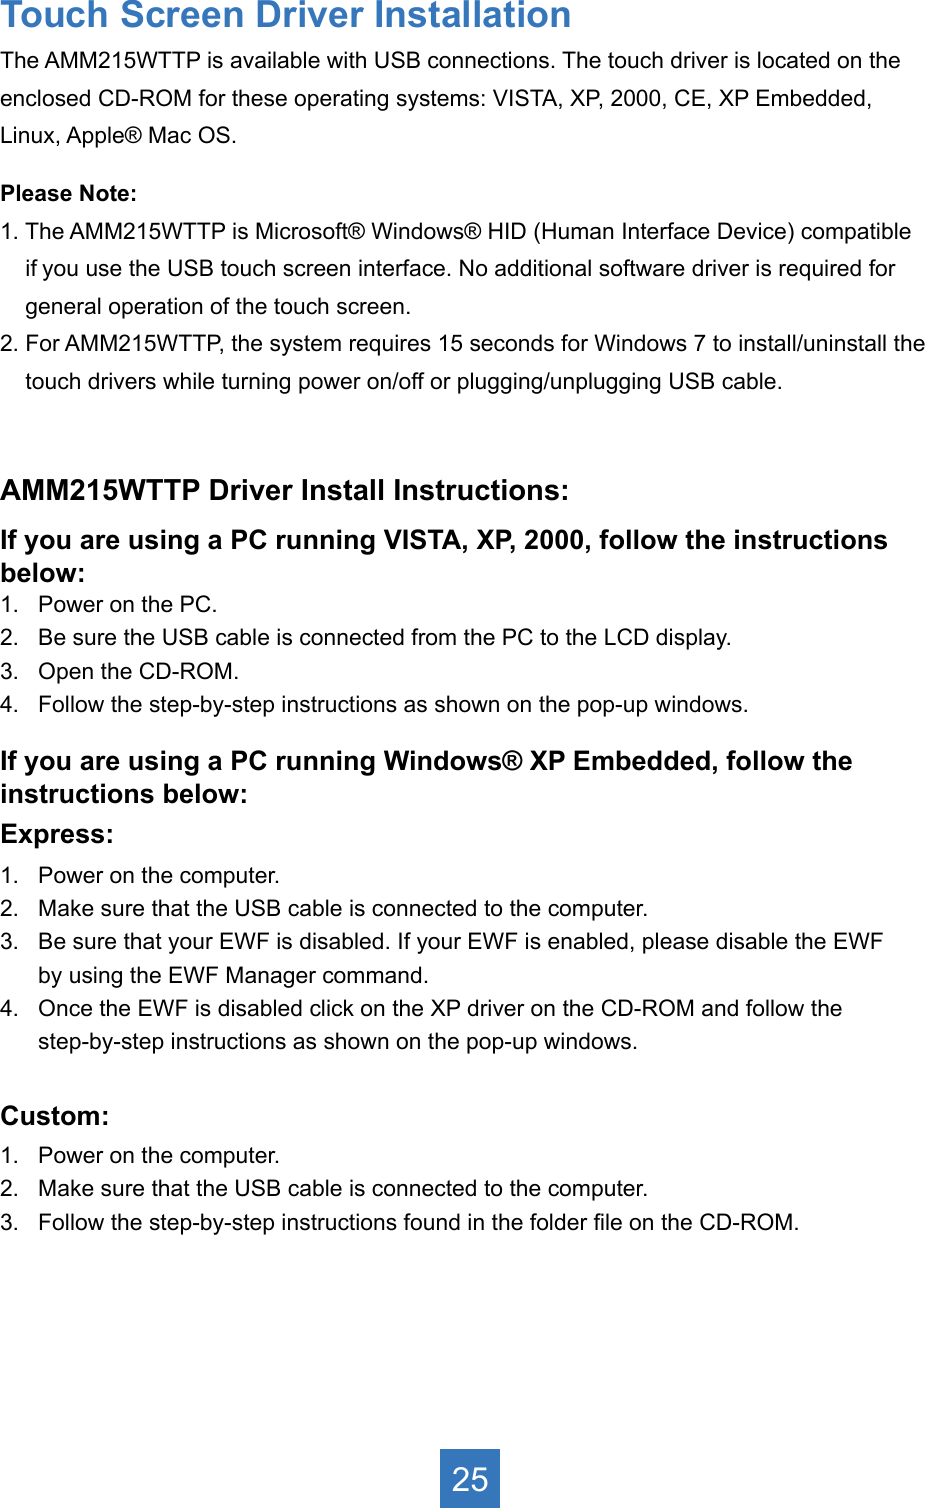 Touch Screen Driver InstallationThe AMM215WTTP is available with USB connections. The touch driver is located on theenclosed CD-ROM for these operating systems: VISTA, XP, 2000, CE, XP Embedded,Linux, Apple® Mac OS.Please Note: 1. The AMM215WTTP is Microsoft® Windows® HID (Human Interface Device) compatible     if you use the USB touch screen interface. No additional software driver is required for     general operation of the touch screen. 2. For AMM215WTTP, the system requires 15 seconds for Windows 7 to install/uninstall the      touch drivers while turning power on/off or plugging/unplugging USB cable.AMM215WTTP Driver Install Instructions:If you are using a PC running VISTA, XP, 2000, follow the instructions below:1.   Power on the PC.2.   Be sure the USB cable is connected from the PC to the LCD display.3.   Open the CD-ROM.4.   Follow the step-by-step instructions as shown on the pop-up windows.If you are using a PC running Windows® XP Embedded, follow the instructions below:Express:1.   Power on the computer.2.   Make sure that the USB cable is connected to the computer.3.   Be sure that your EWF is disabled. If your EWF is enabled, please disable the EWF      by using the EWF Manager command.4.   Once the EWF is disabled click on the XP driver on the CD-ROM and follow the       step-by-step instructions as shown on the pop-up windows.Custom:1.   Power on the computer.2.   Make sure that the USB cable is connected to the computer.3.   Follow the step-by-step instructions found in the folder le on the CD-ROM.25